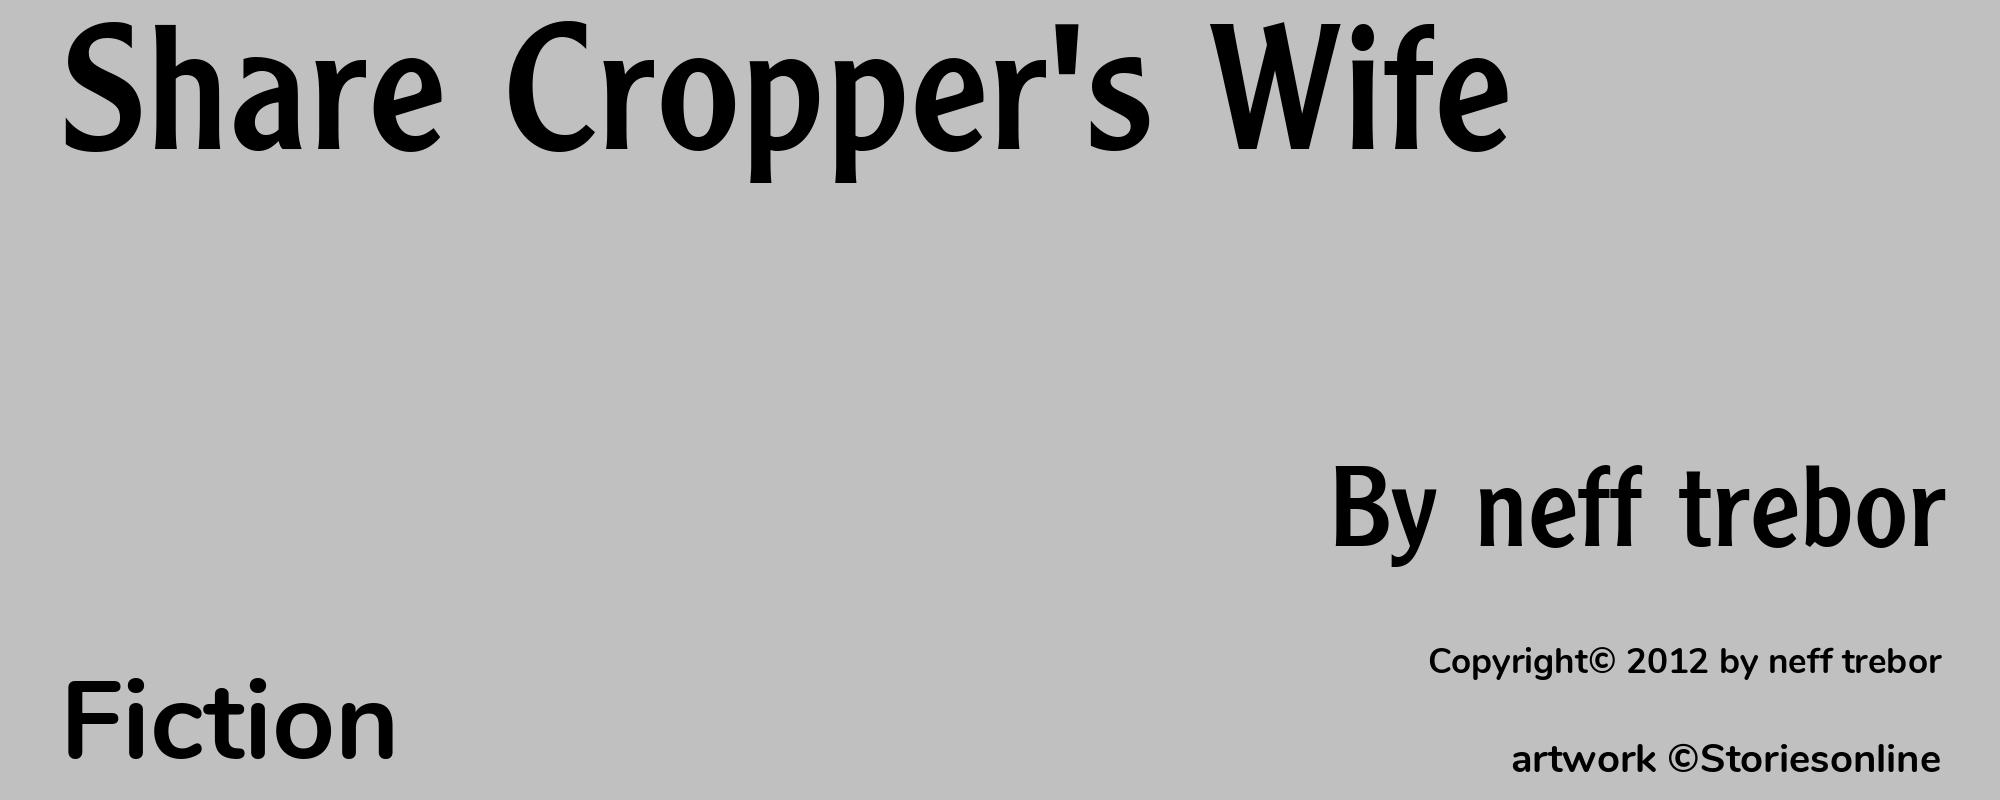 Share Cropper's Wife - Cover